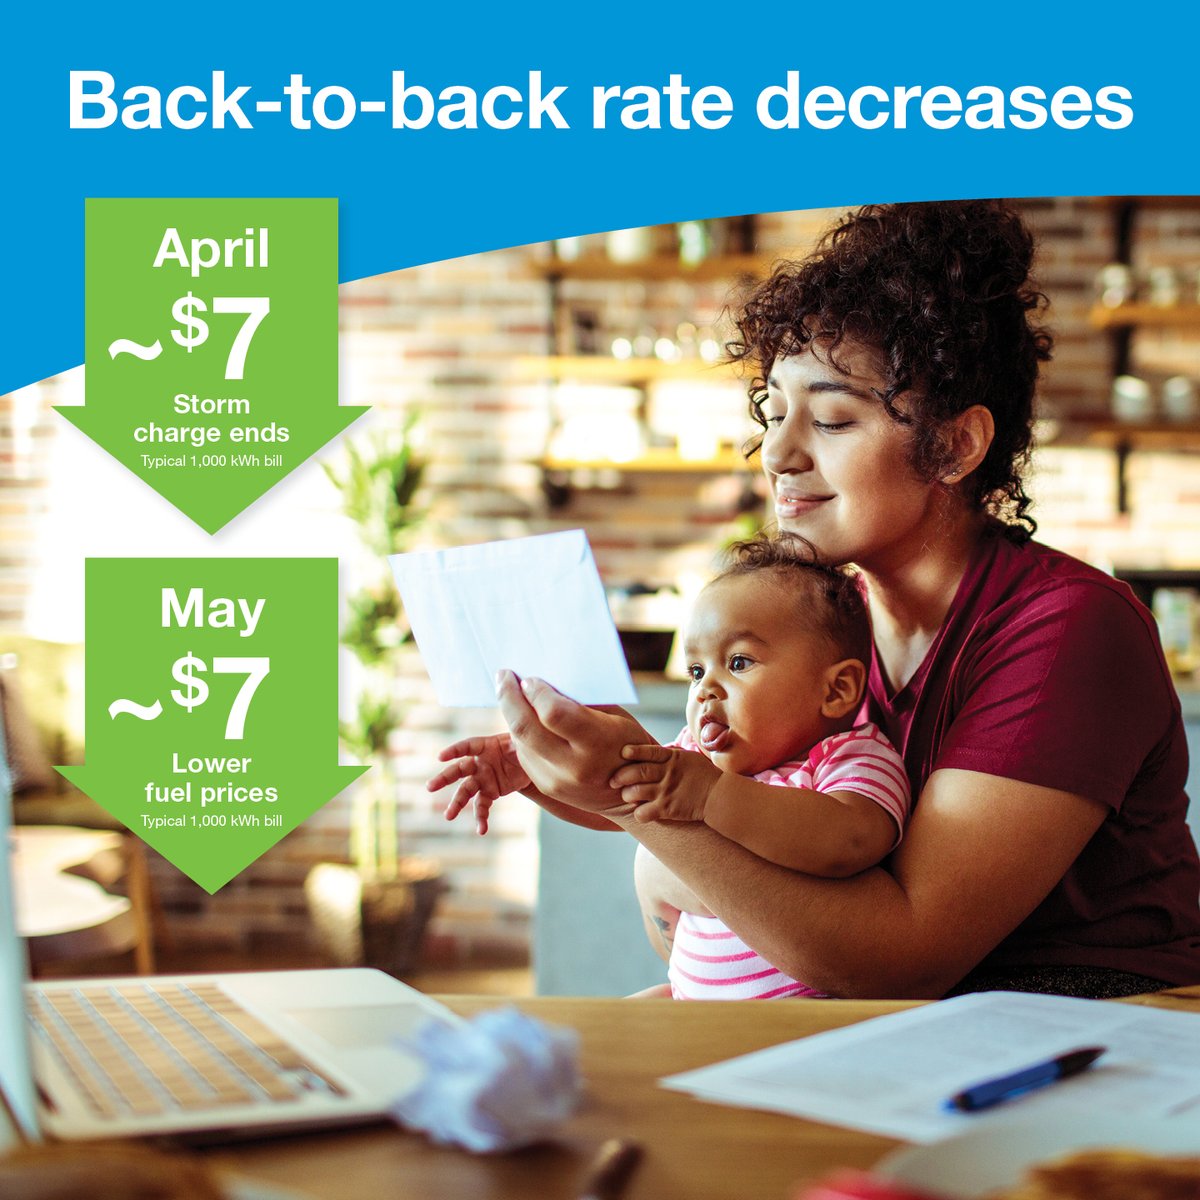 Good news: Back-to-back rate decreases. Rates drop this month with a hurricane charge ending. Another reduction is coming in May for lower fuel prices. Get the details at FPL.com/rates.